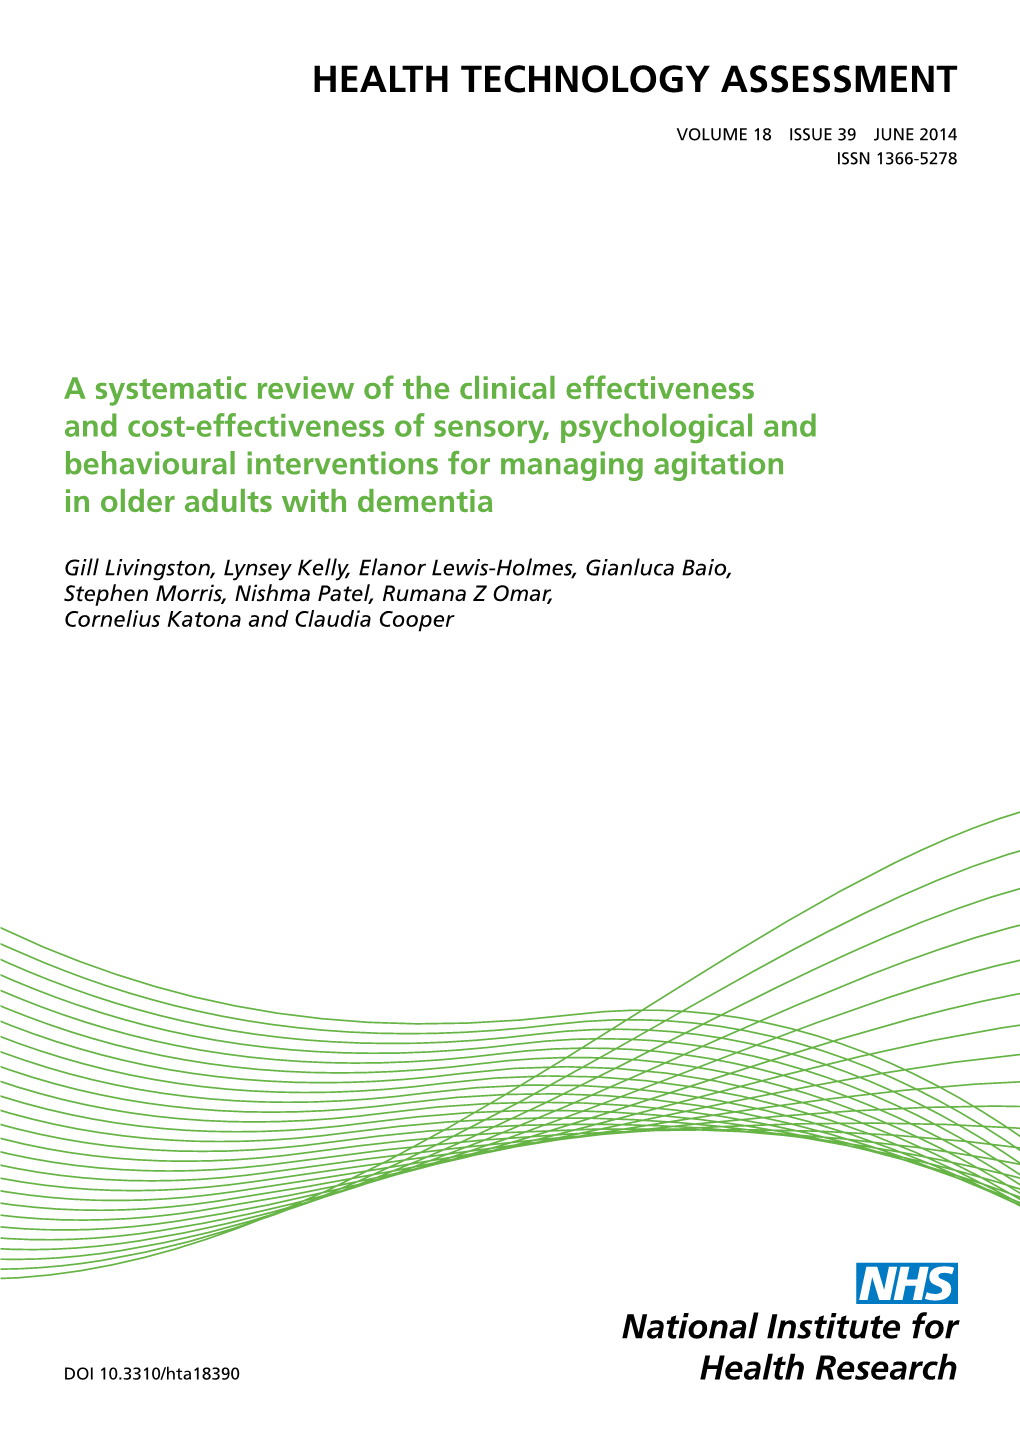 A Systematic Review of the Clinical Effectiveness and Cost-Effectiveness of Sensory, Psychological and Behavioural Interventions